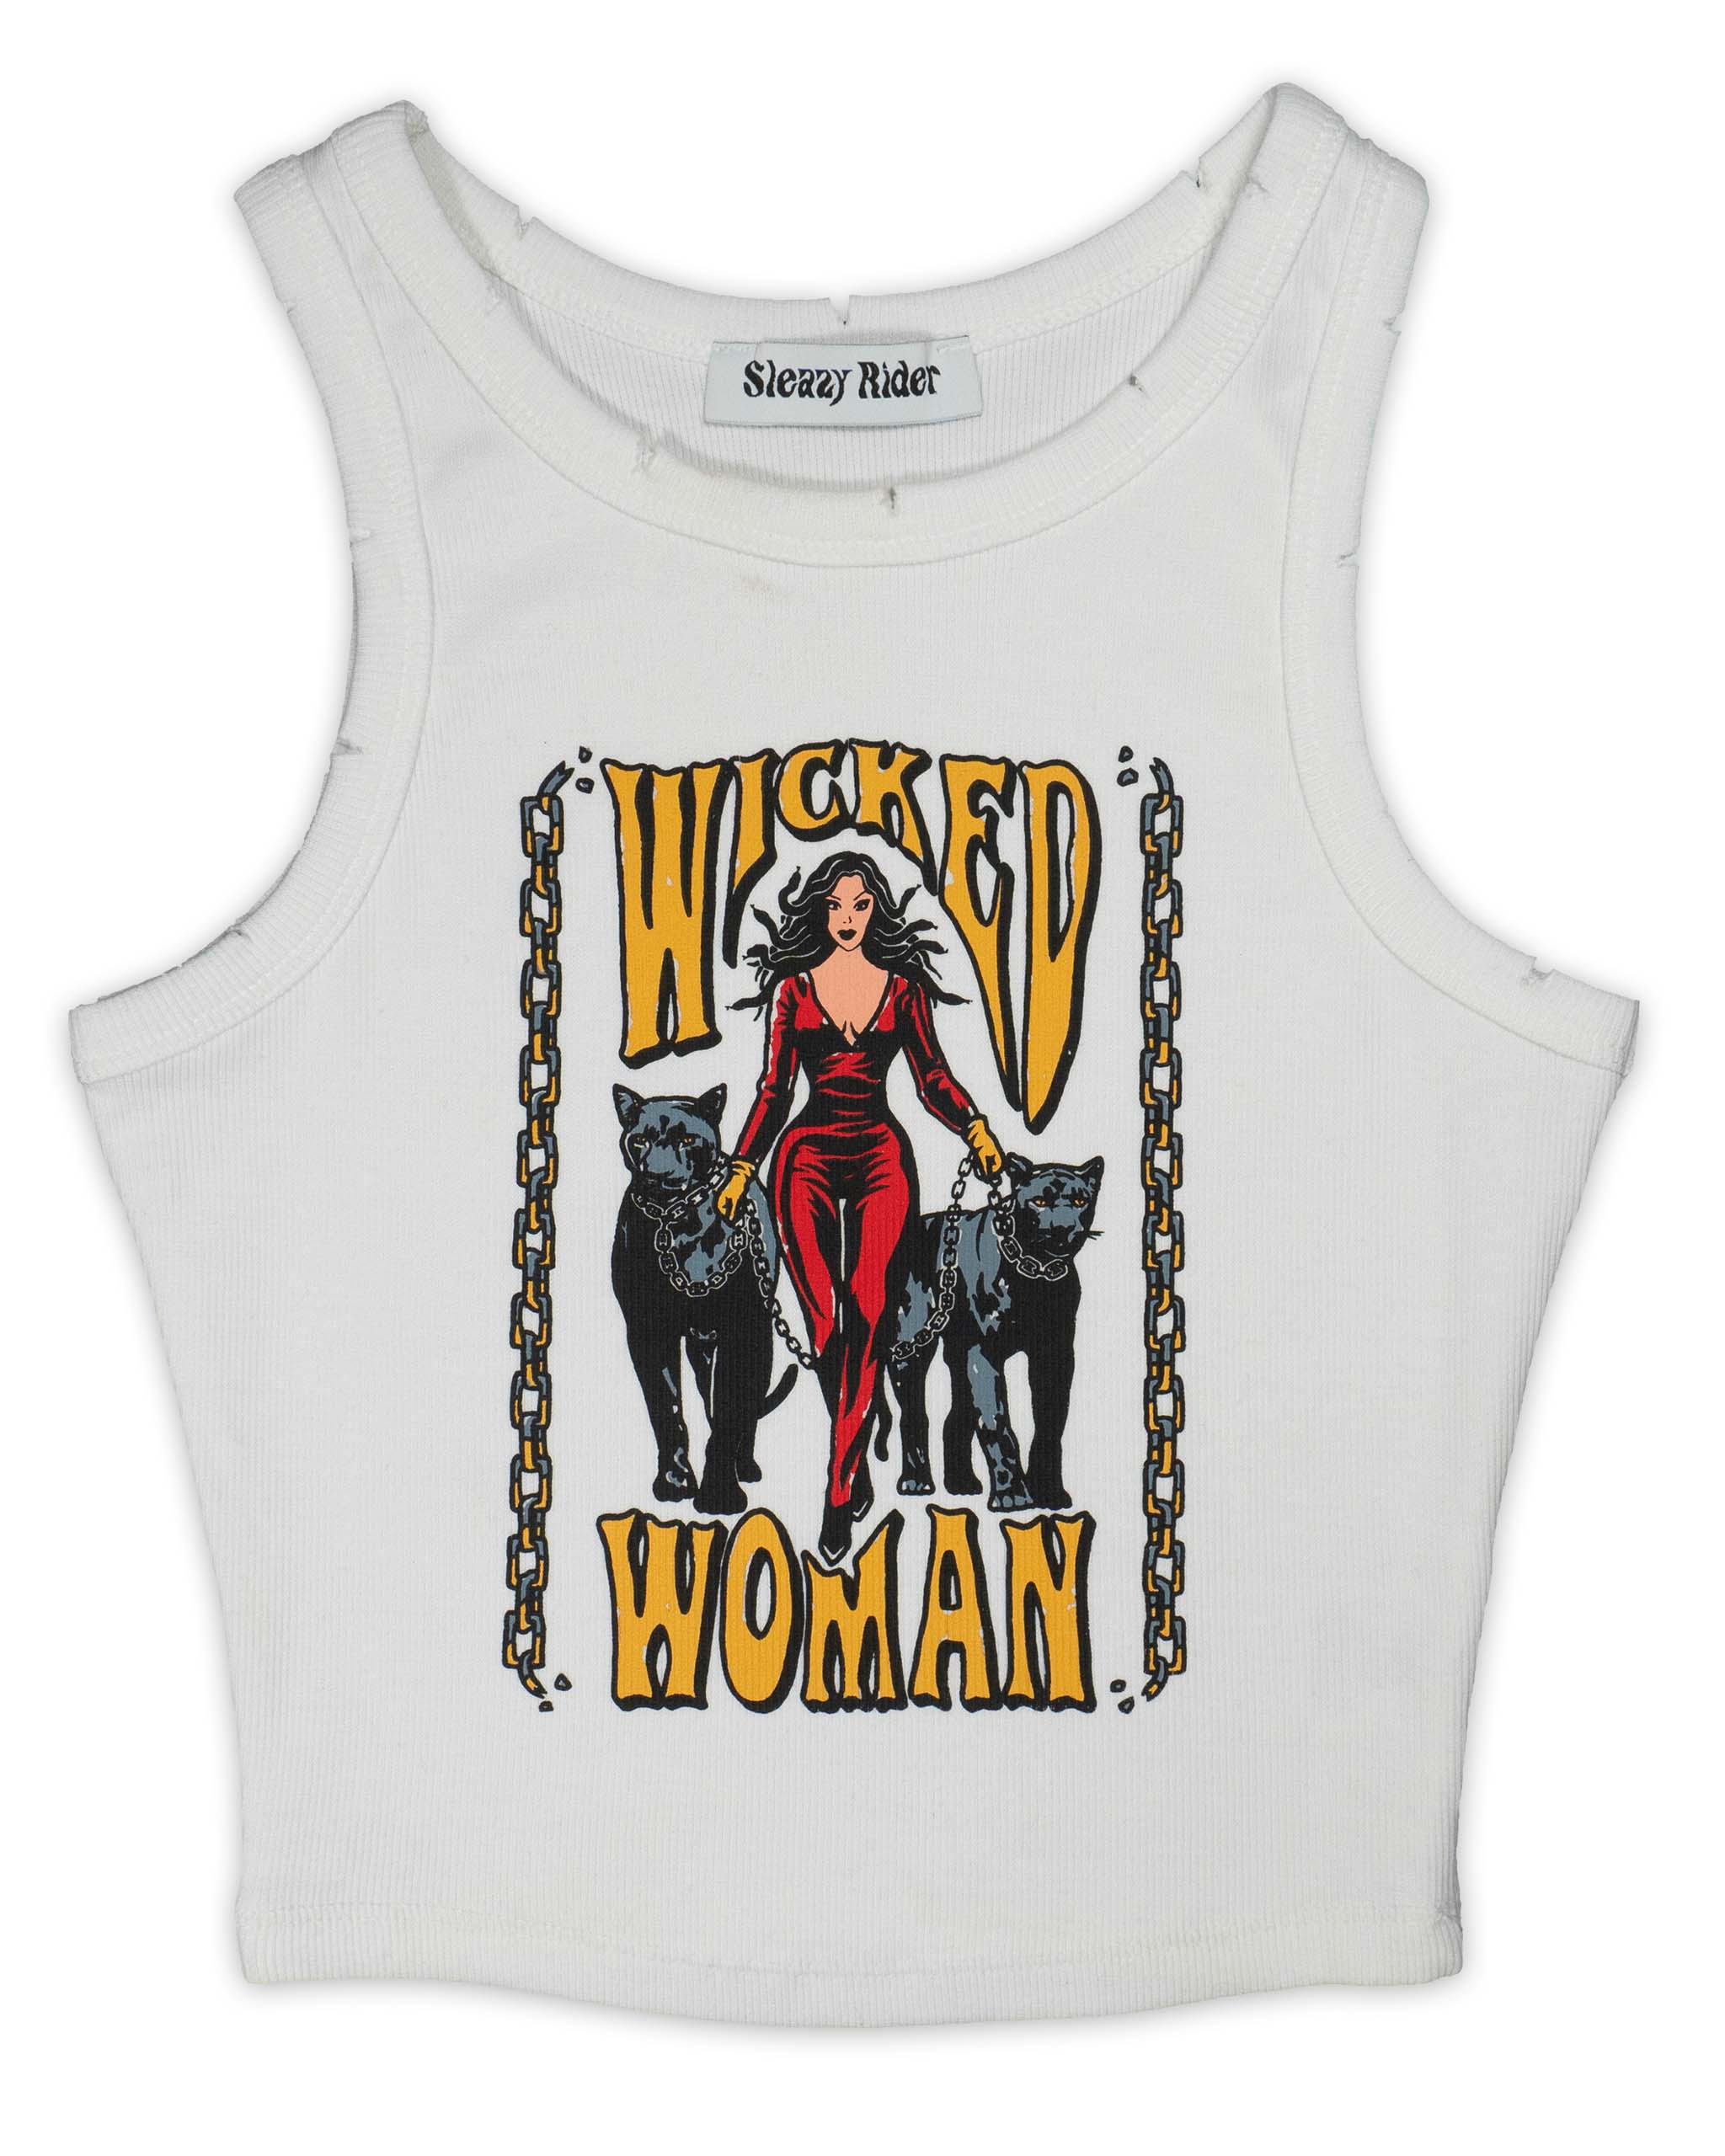 Wicked Woman tank top by Sleazy Rider